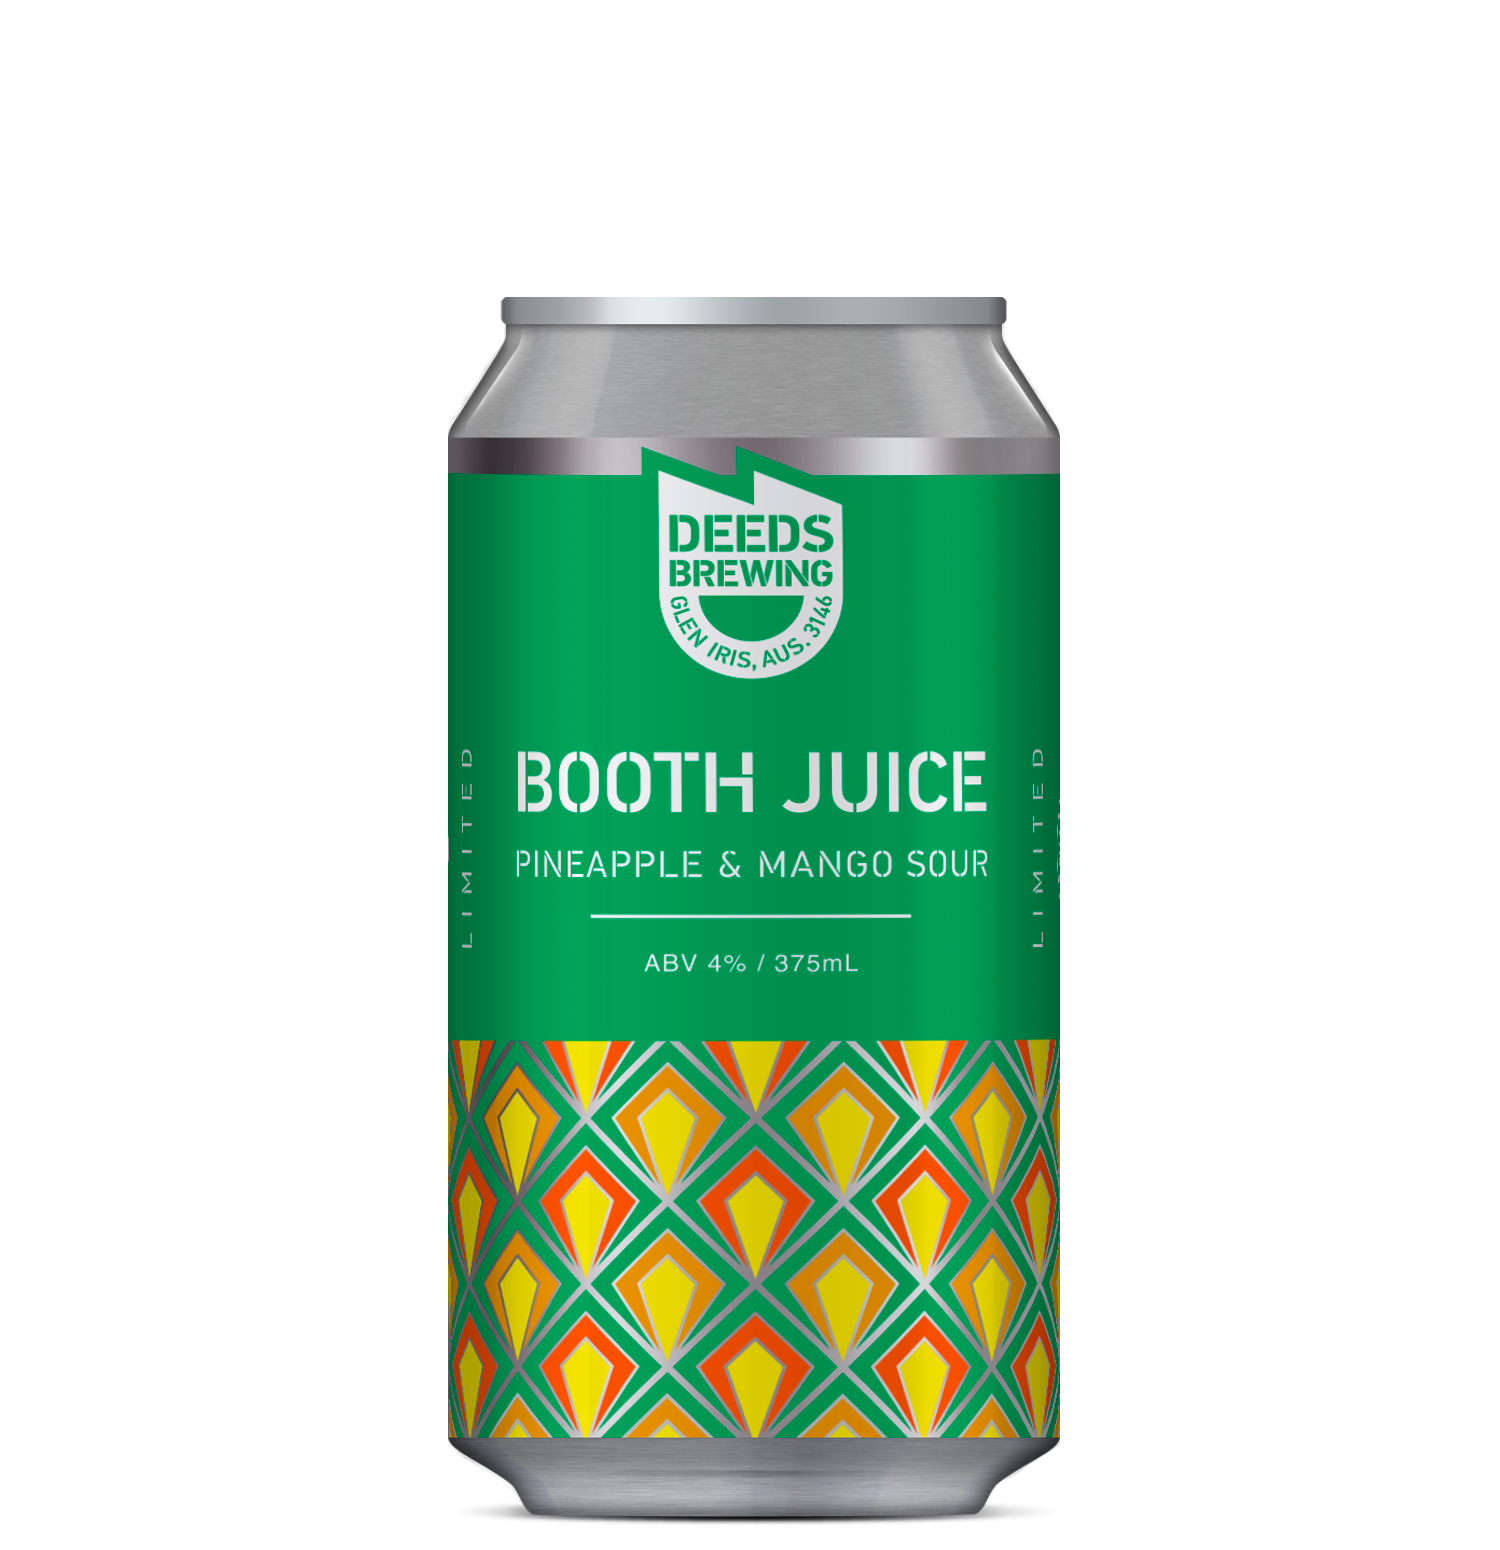 Booth Juice